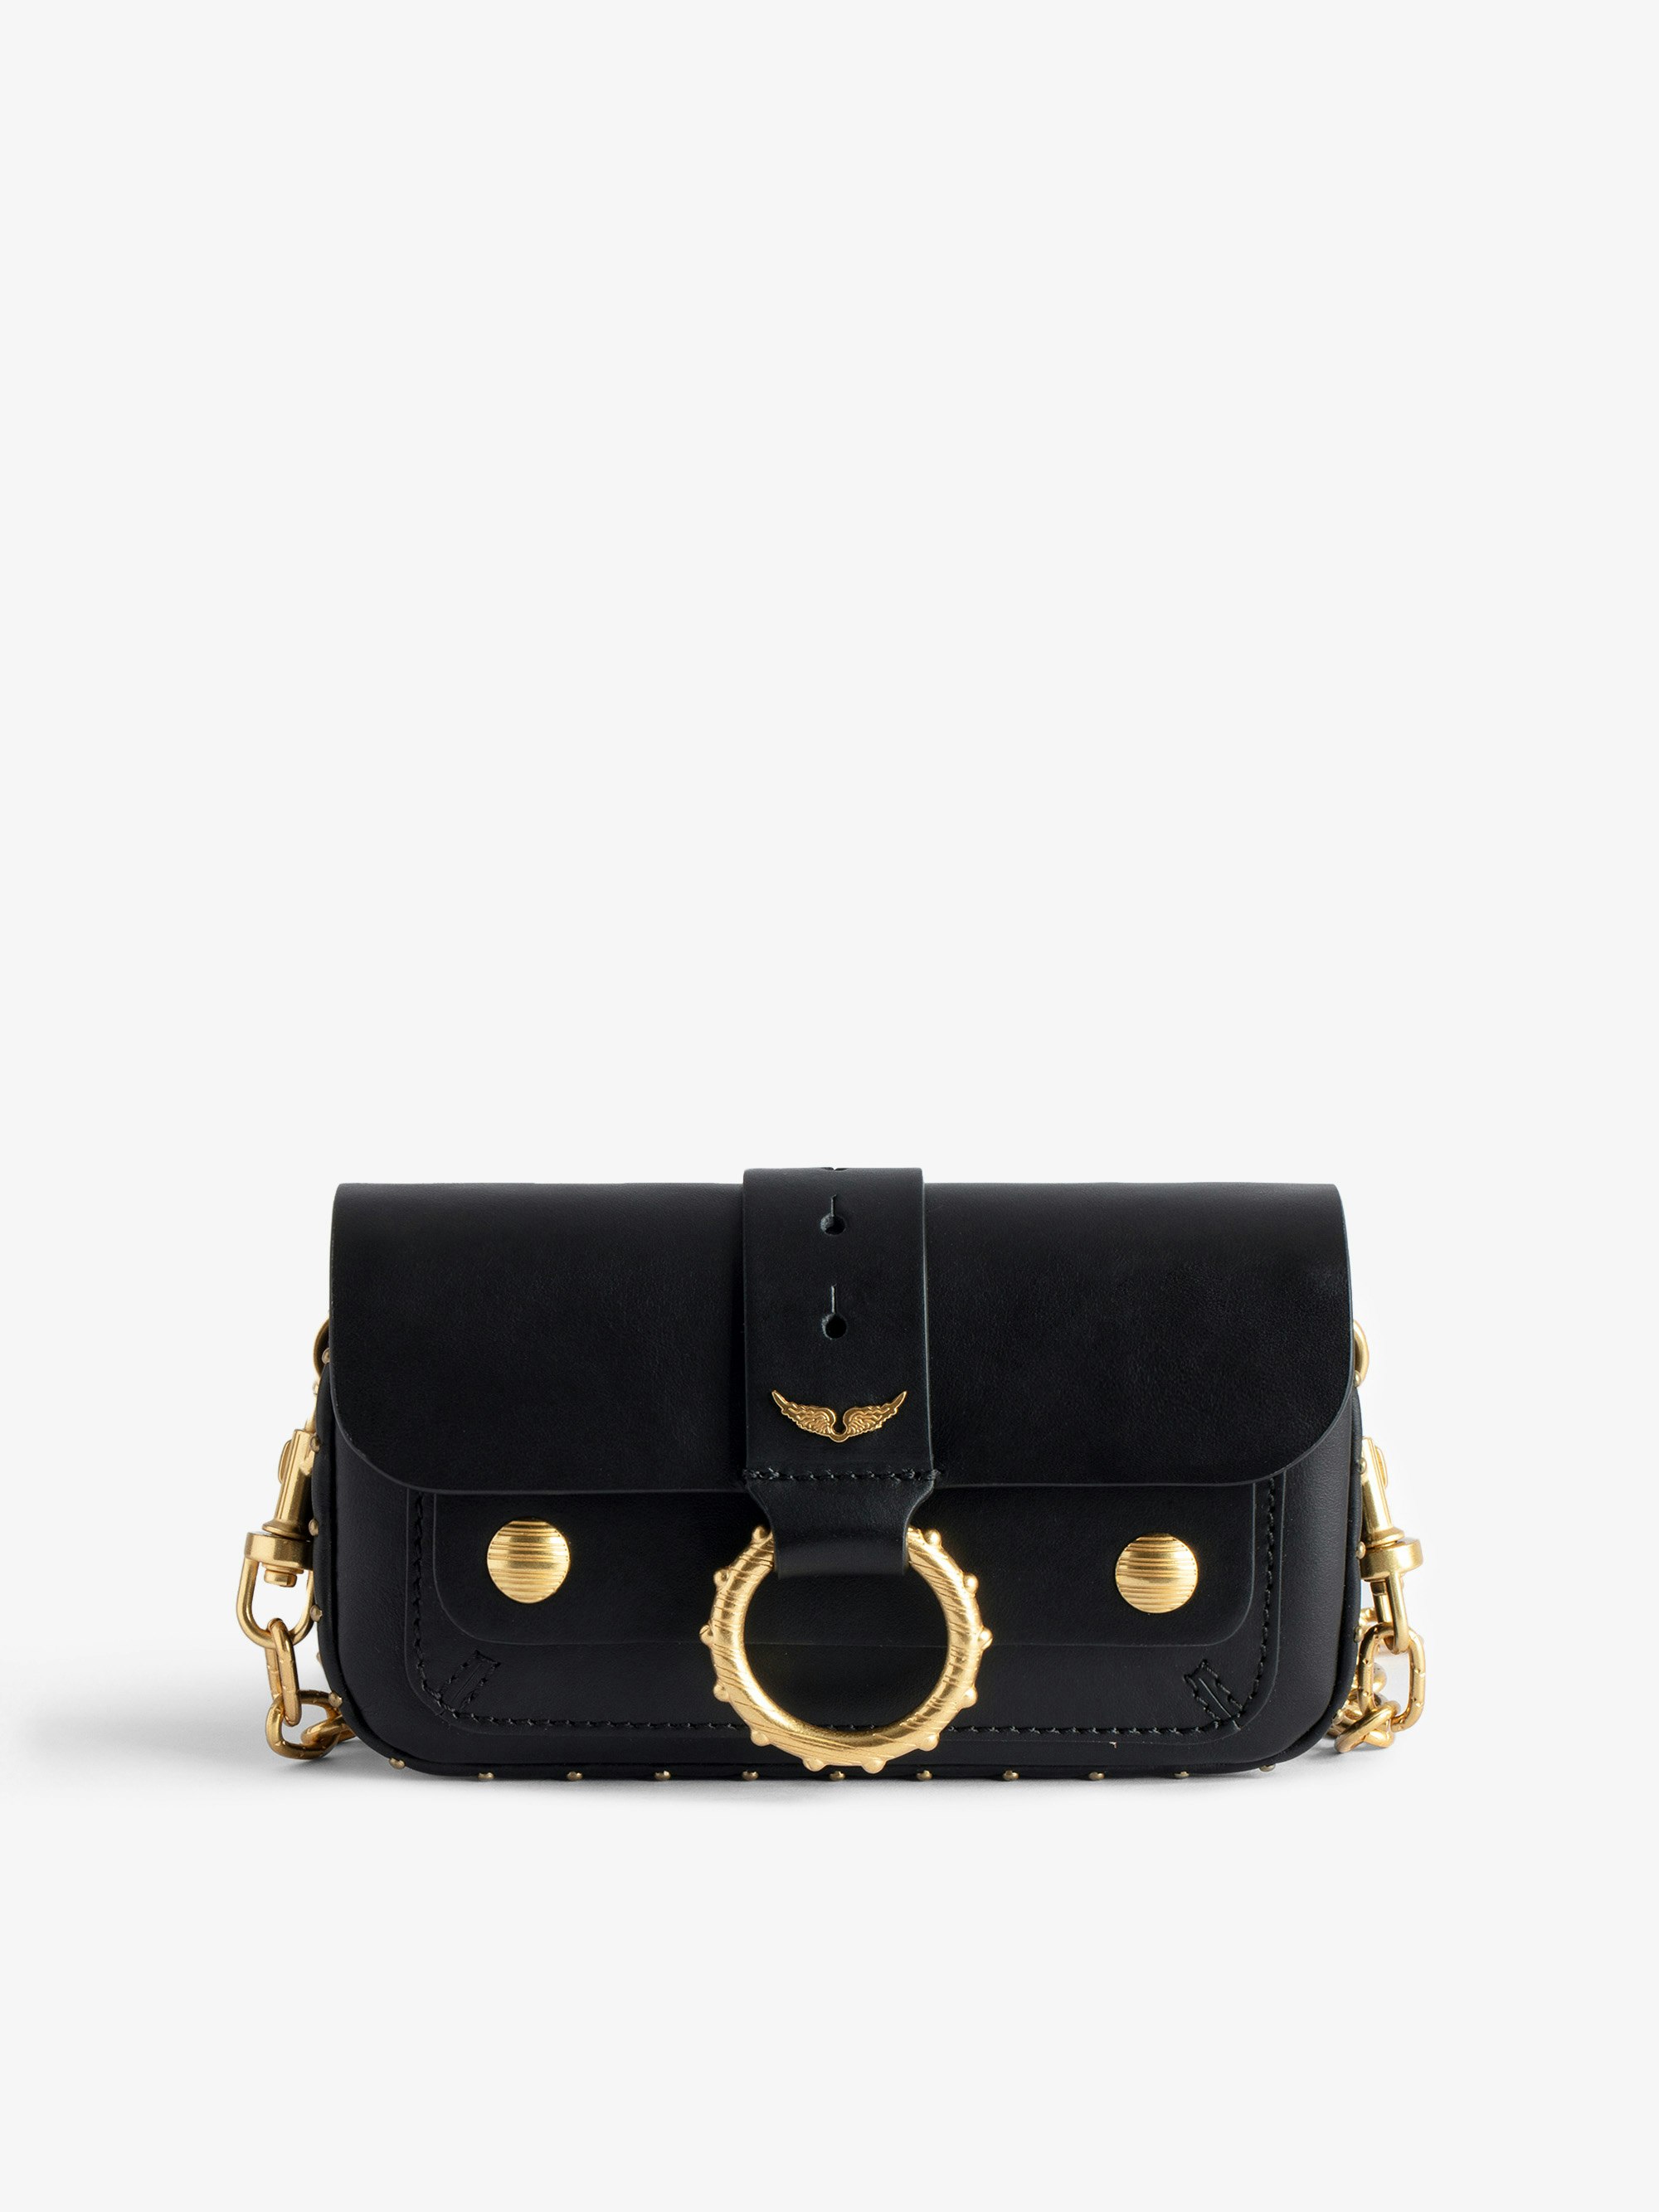 Kate Wallet Bag - Designed by Kate Moss for Zadig&Voltaire.  Women’s black smooth leather mini bag with metal chain.